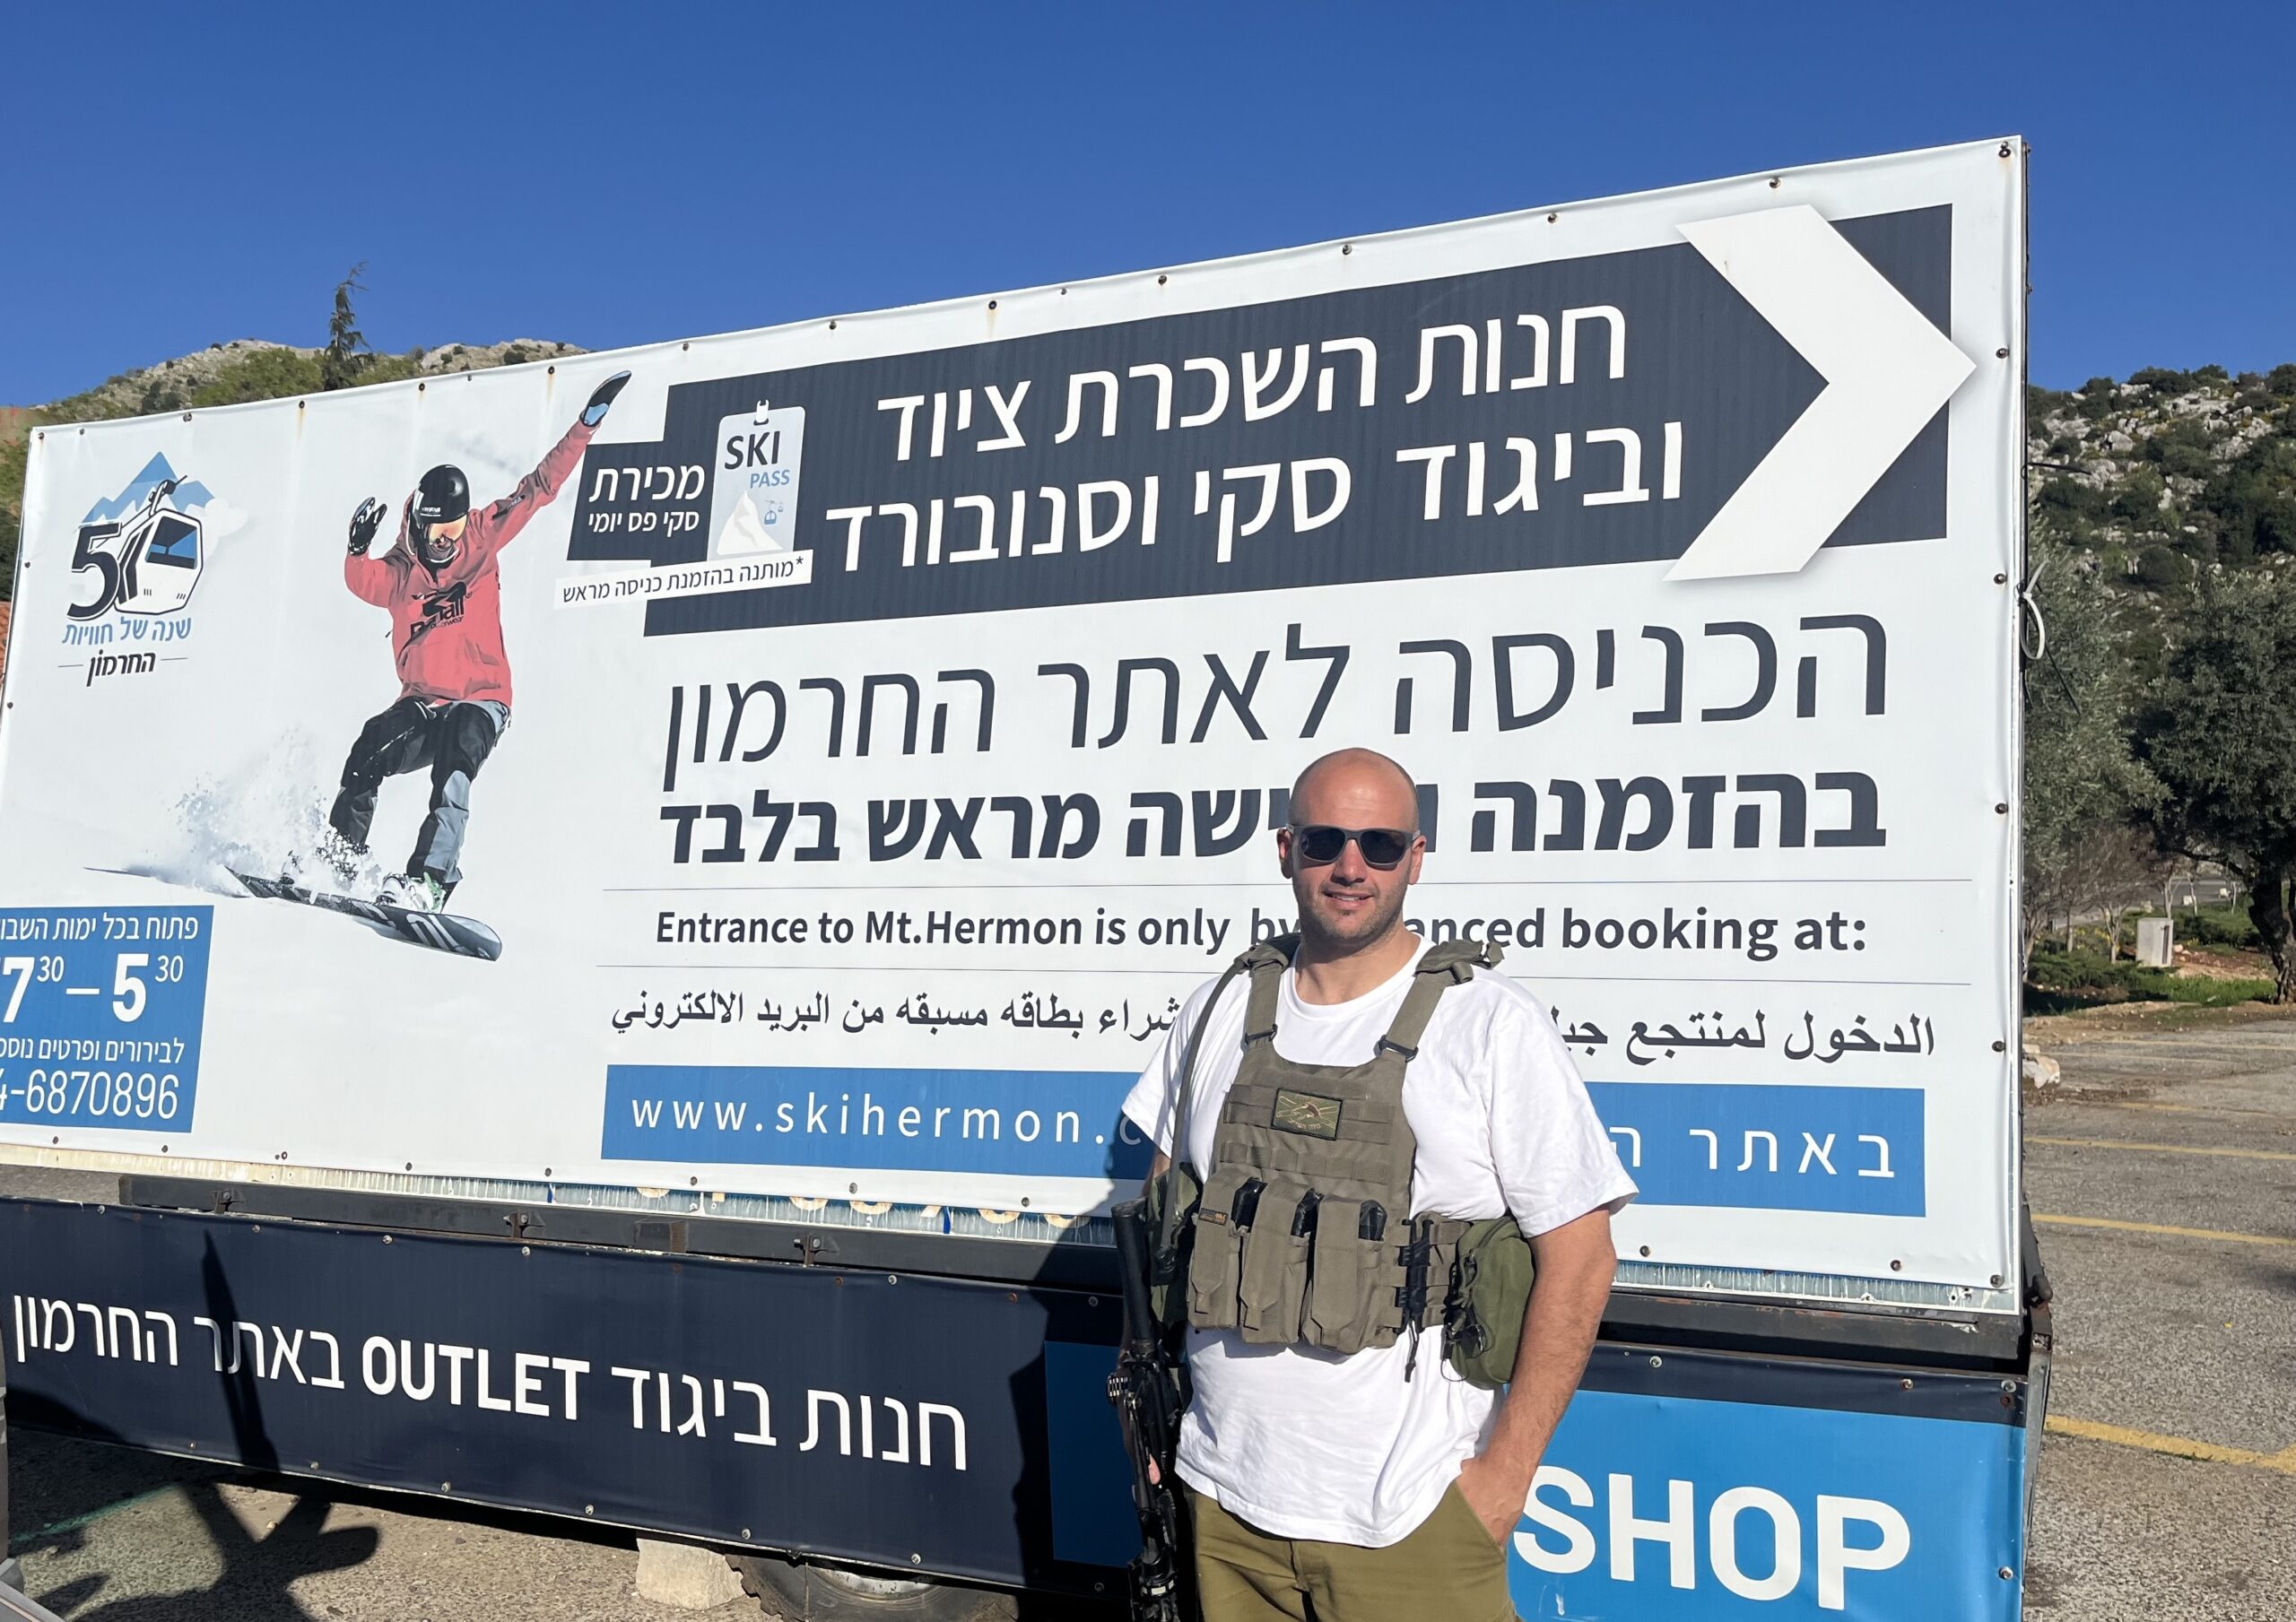 Israel’s canceled ski season reveals a ripple effect of war: economic hardship in the north